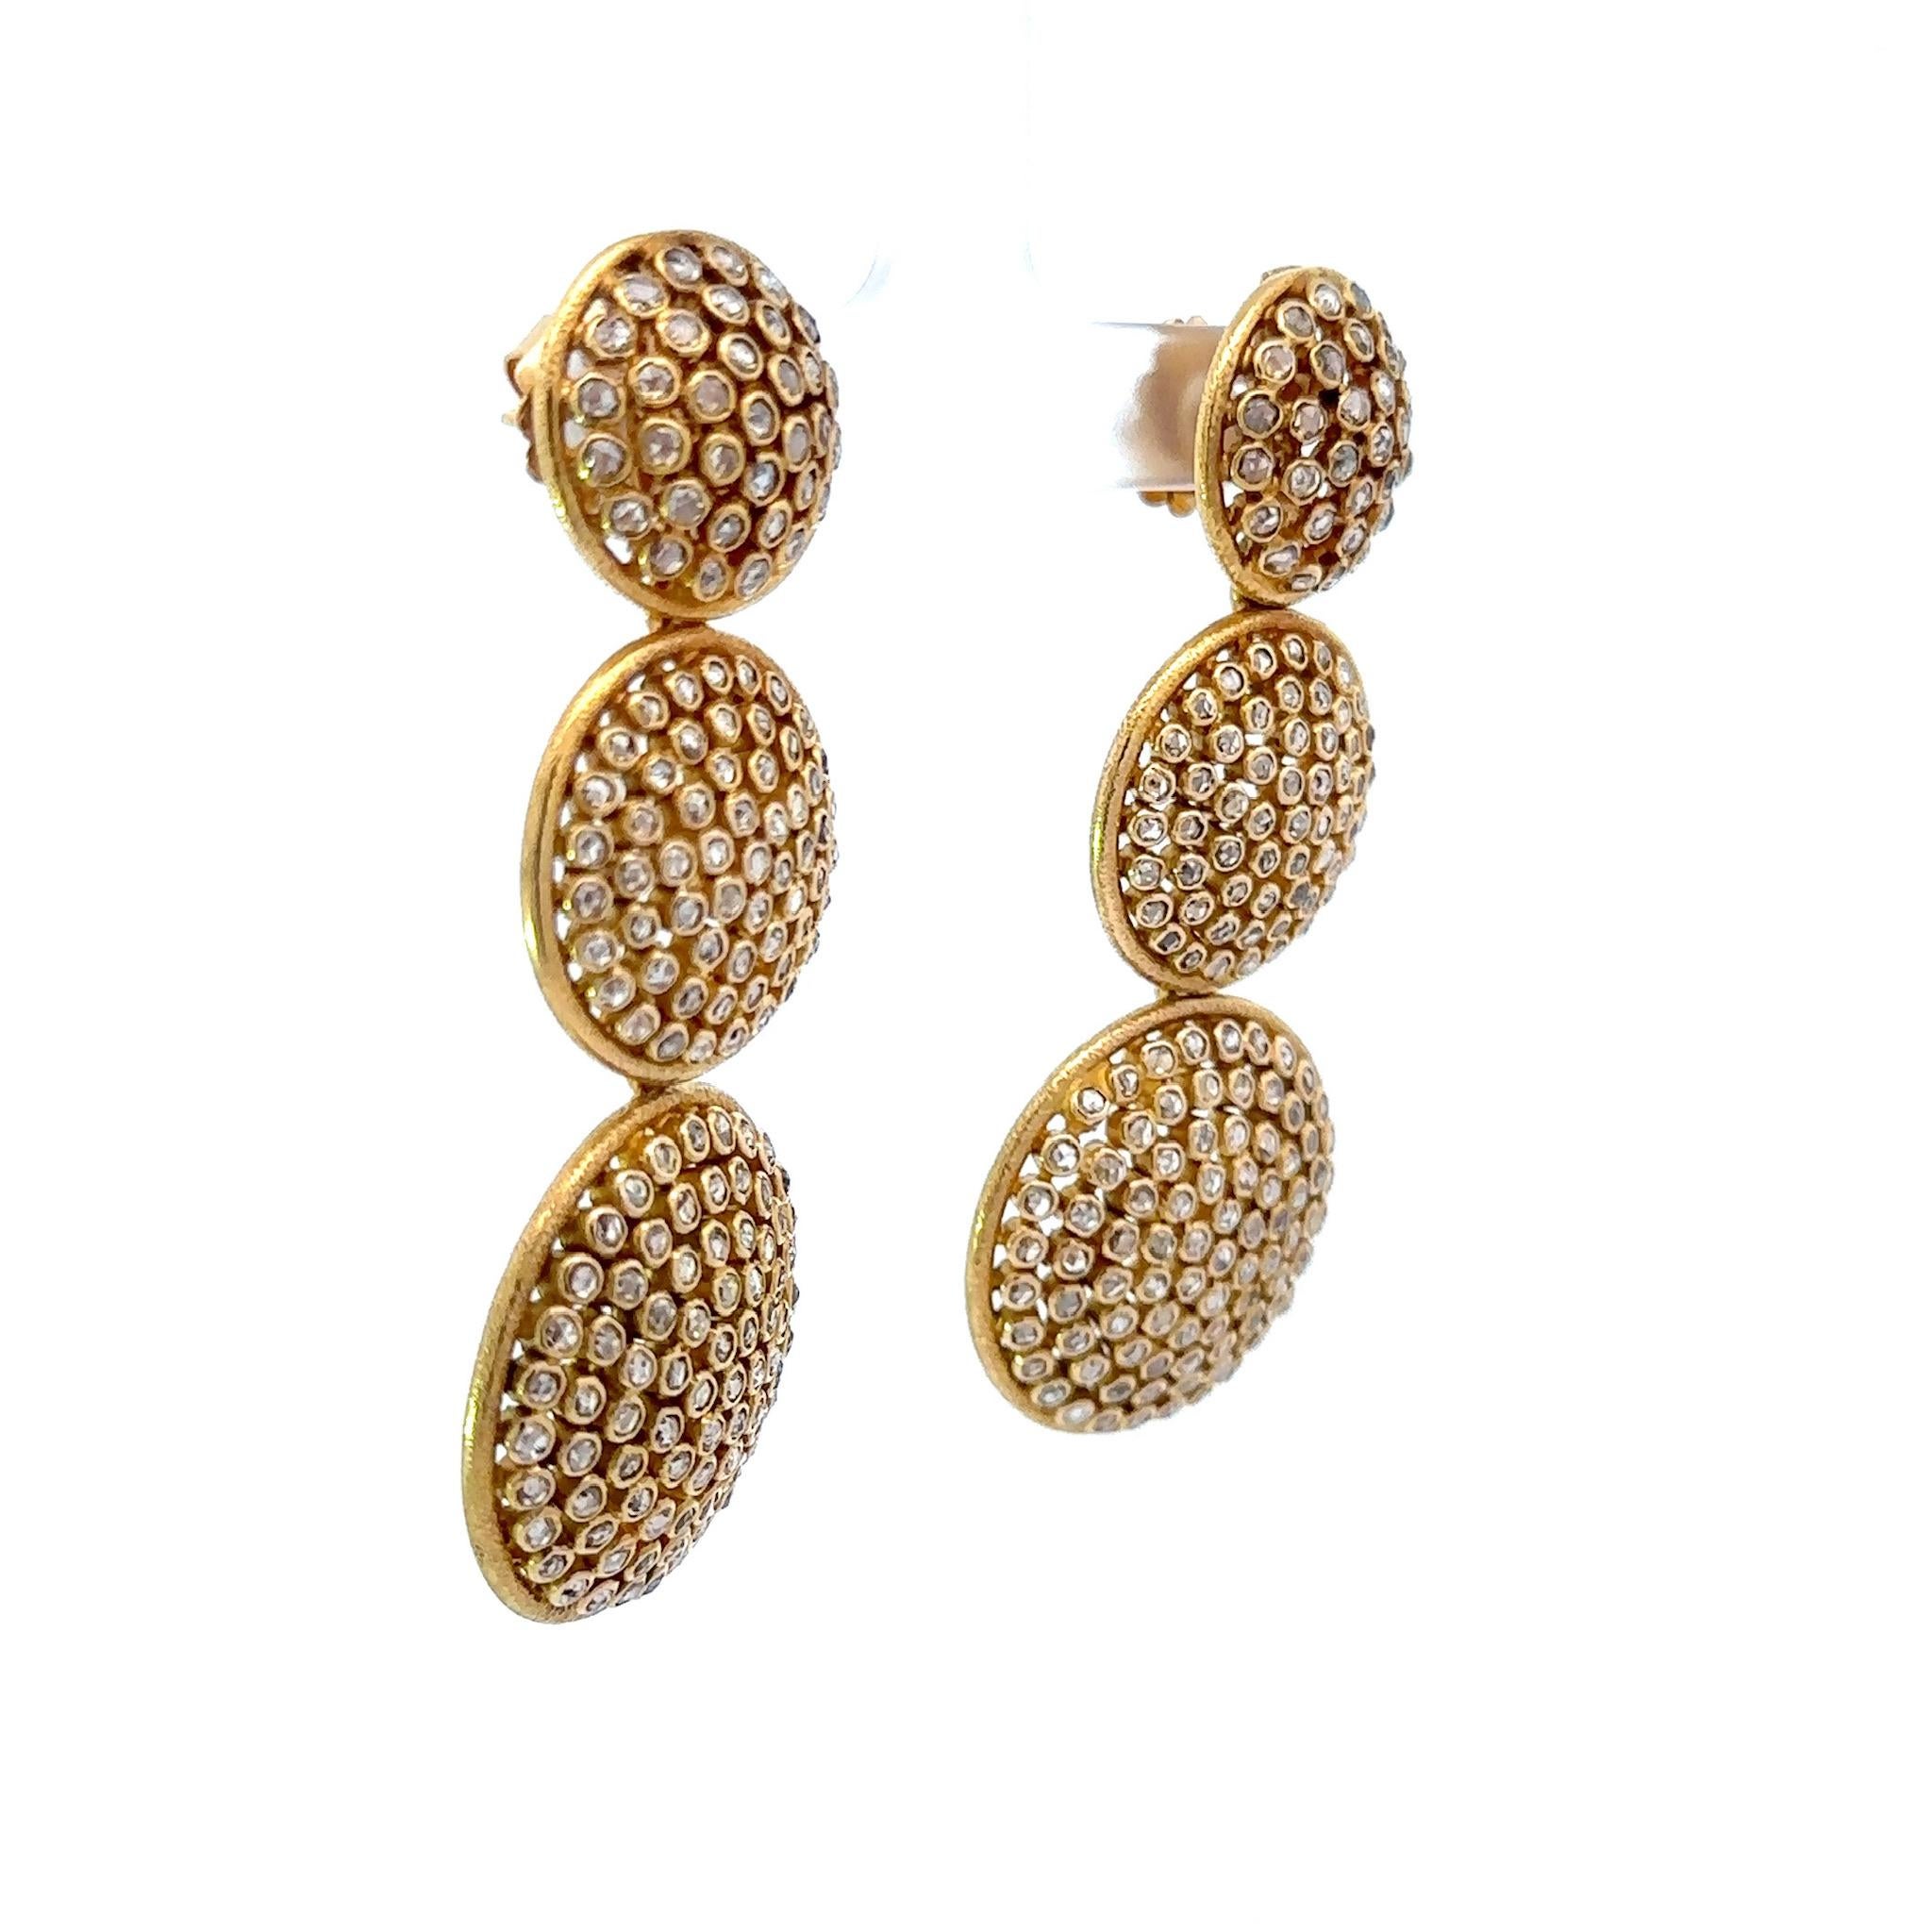 Fashionable, fun and elegant - that is what this magnificent pair of Diamond Drop earrings exude! The 18K Gold Triple Circle Drop Earrings hold a total of 4.50 carats, consisting of spectacular Rose Cut SI-VS diamonds, H/I color. The hand crafted